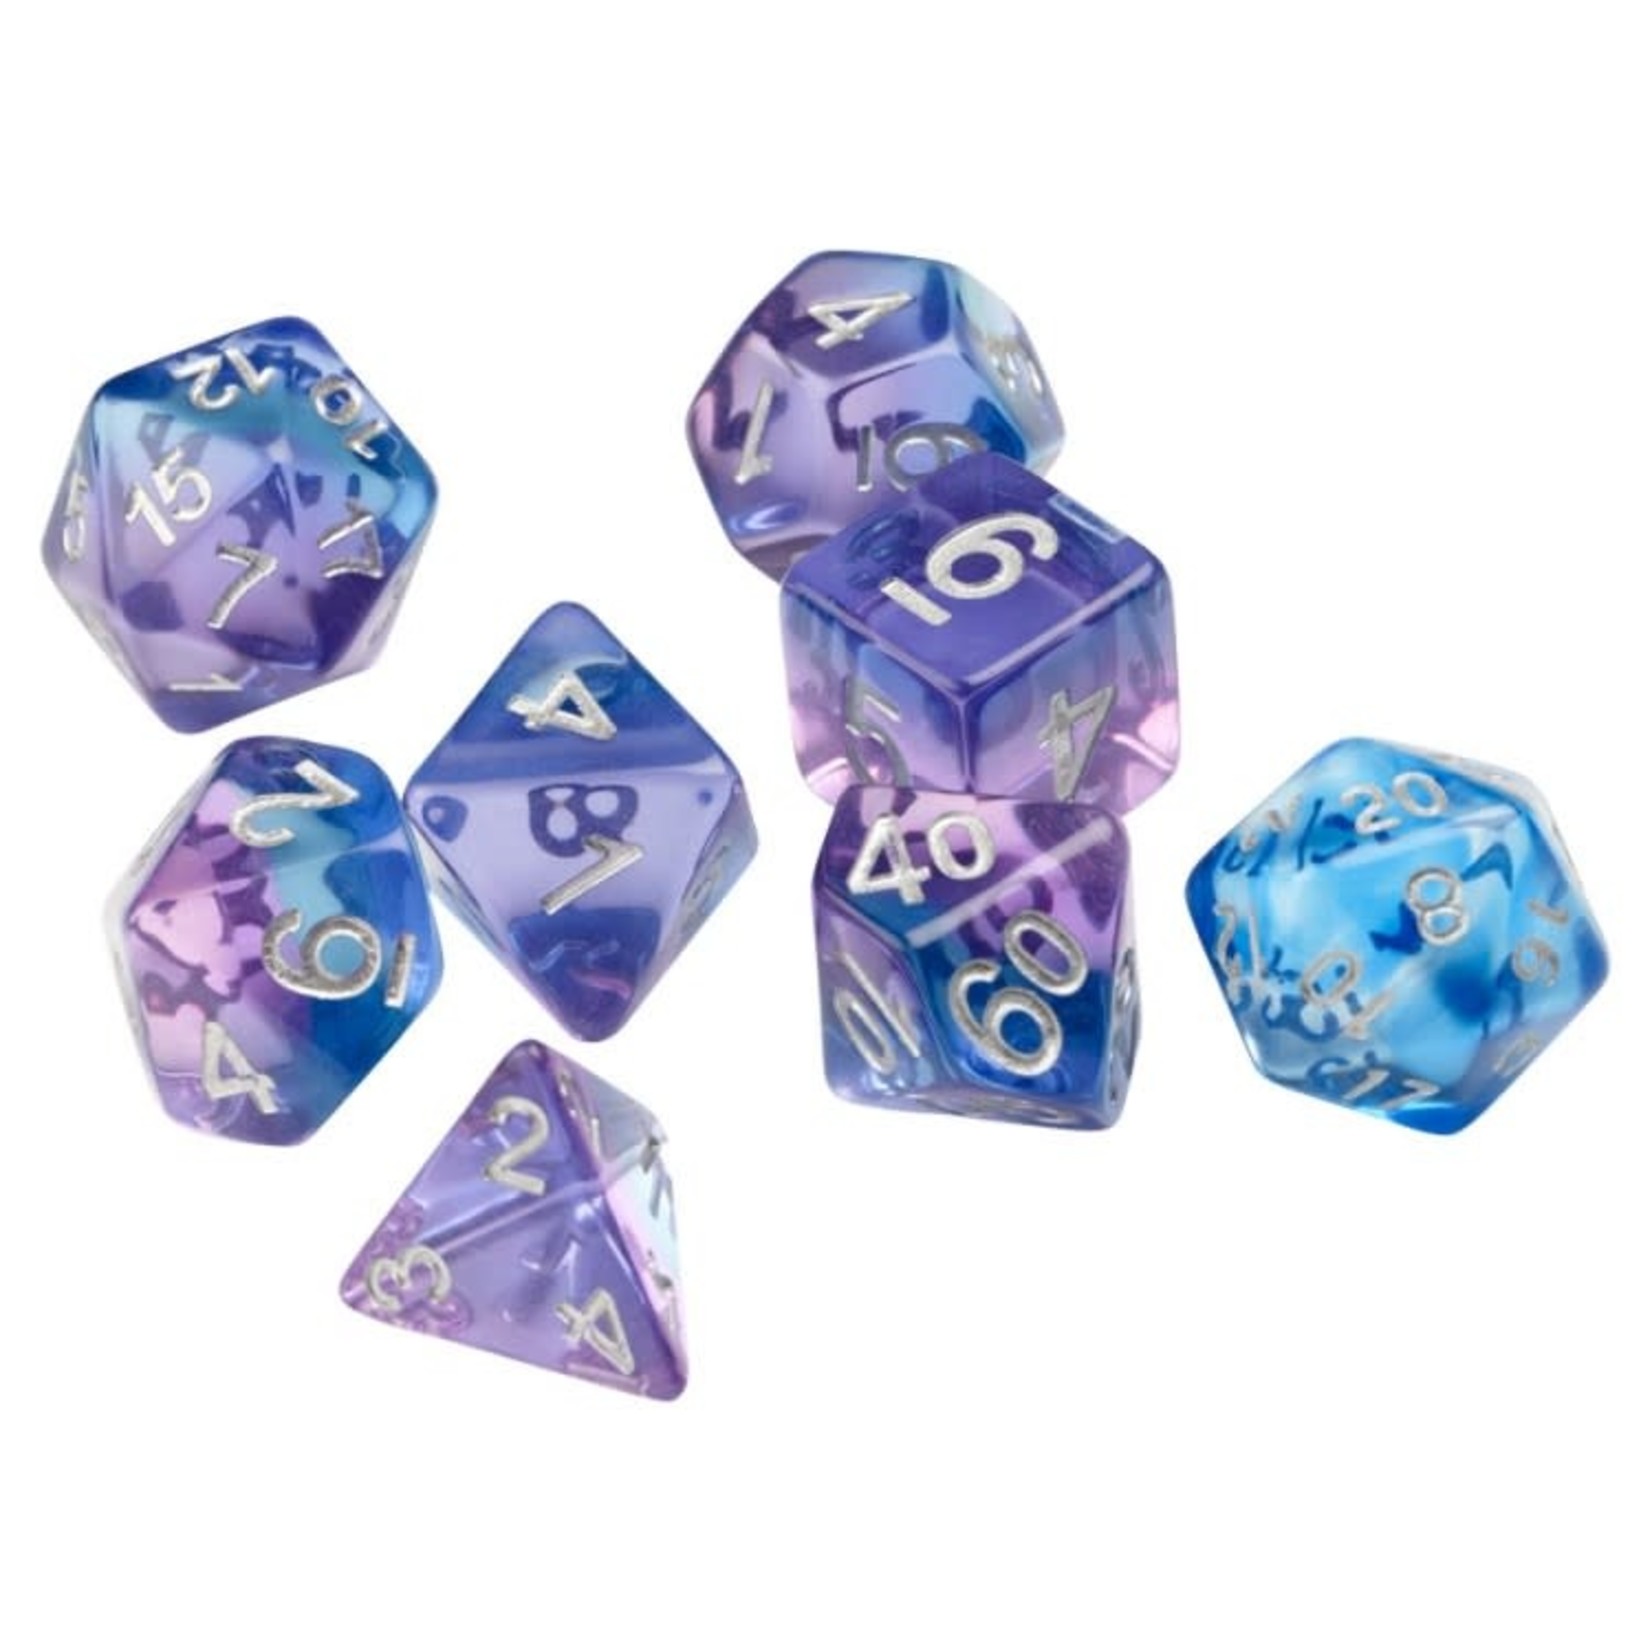 Sirius RPG Dice Violet Betta Translucent Blue / Purple with Silver Polyhedral 8 die set